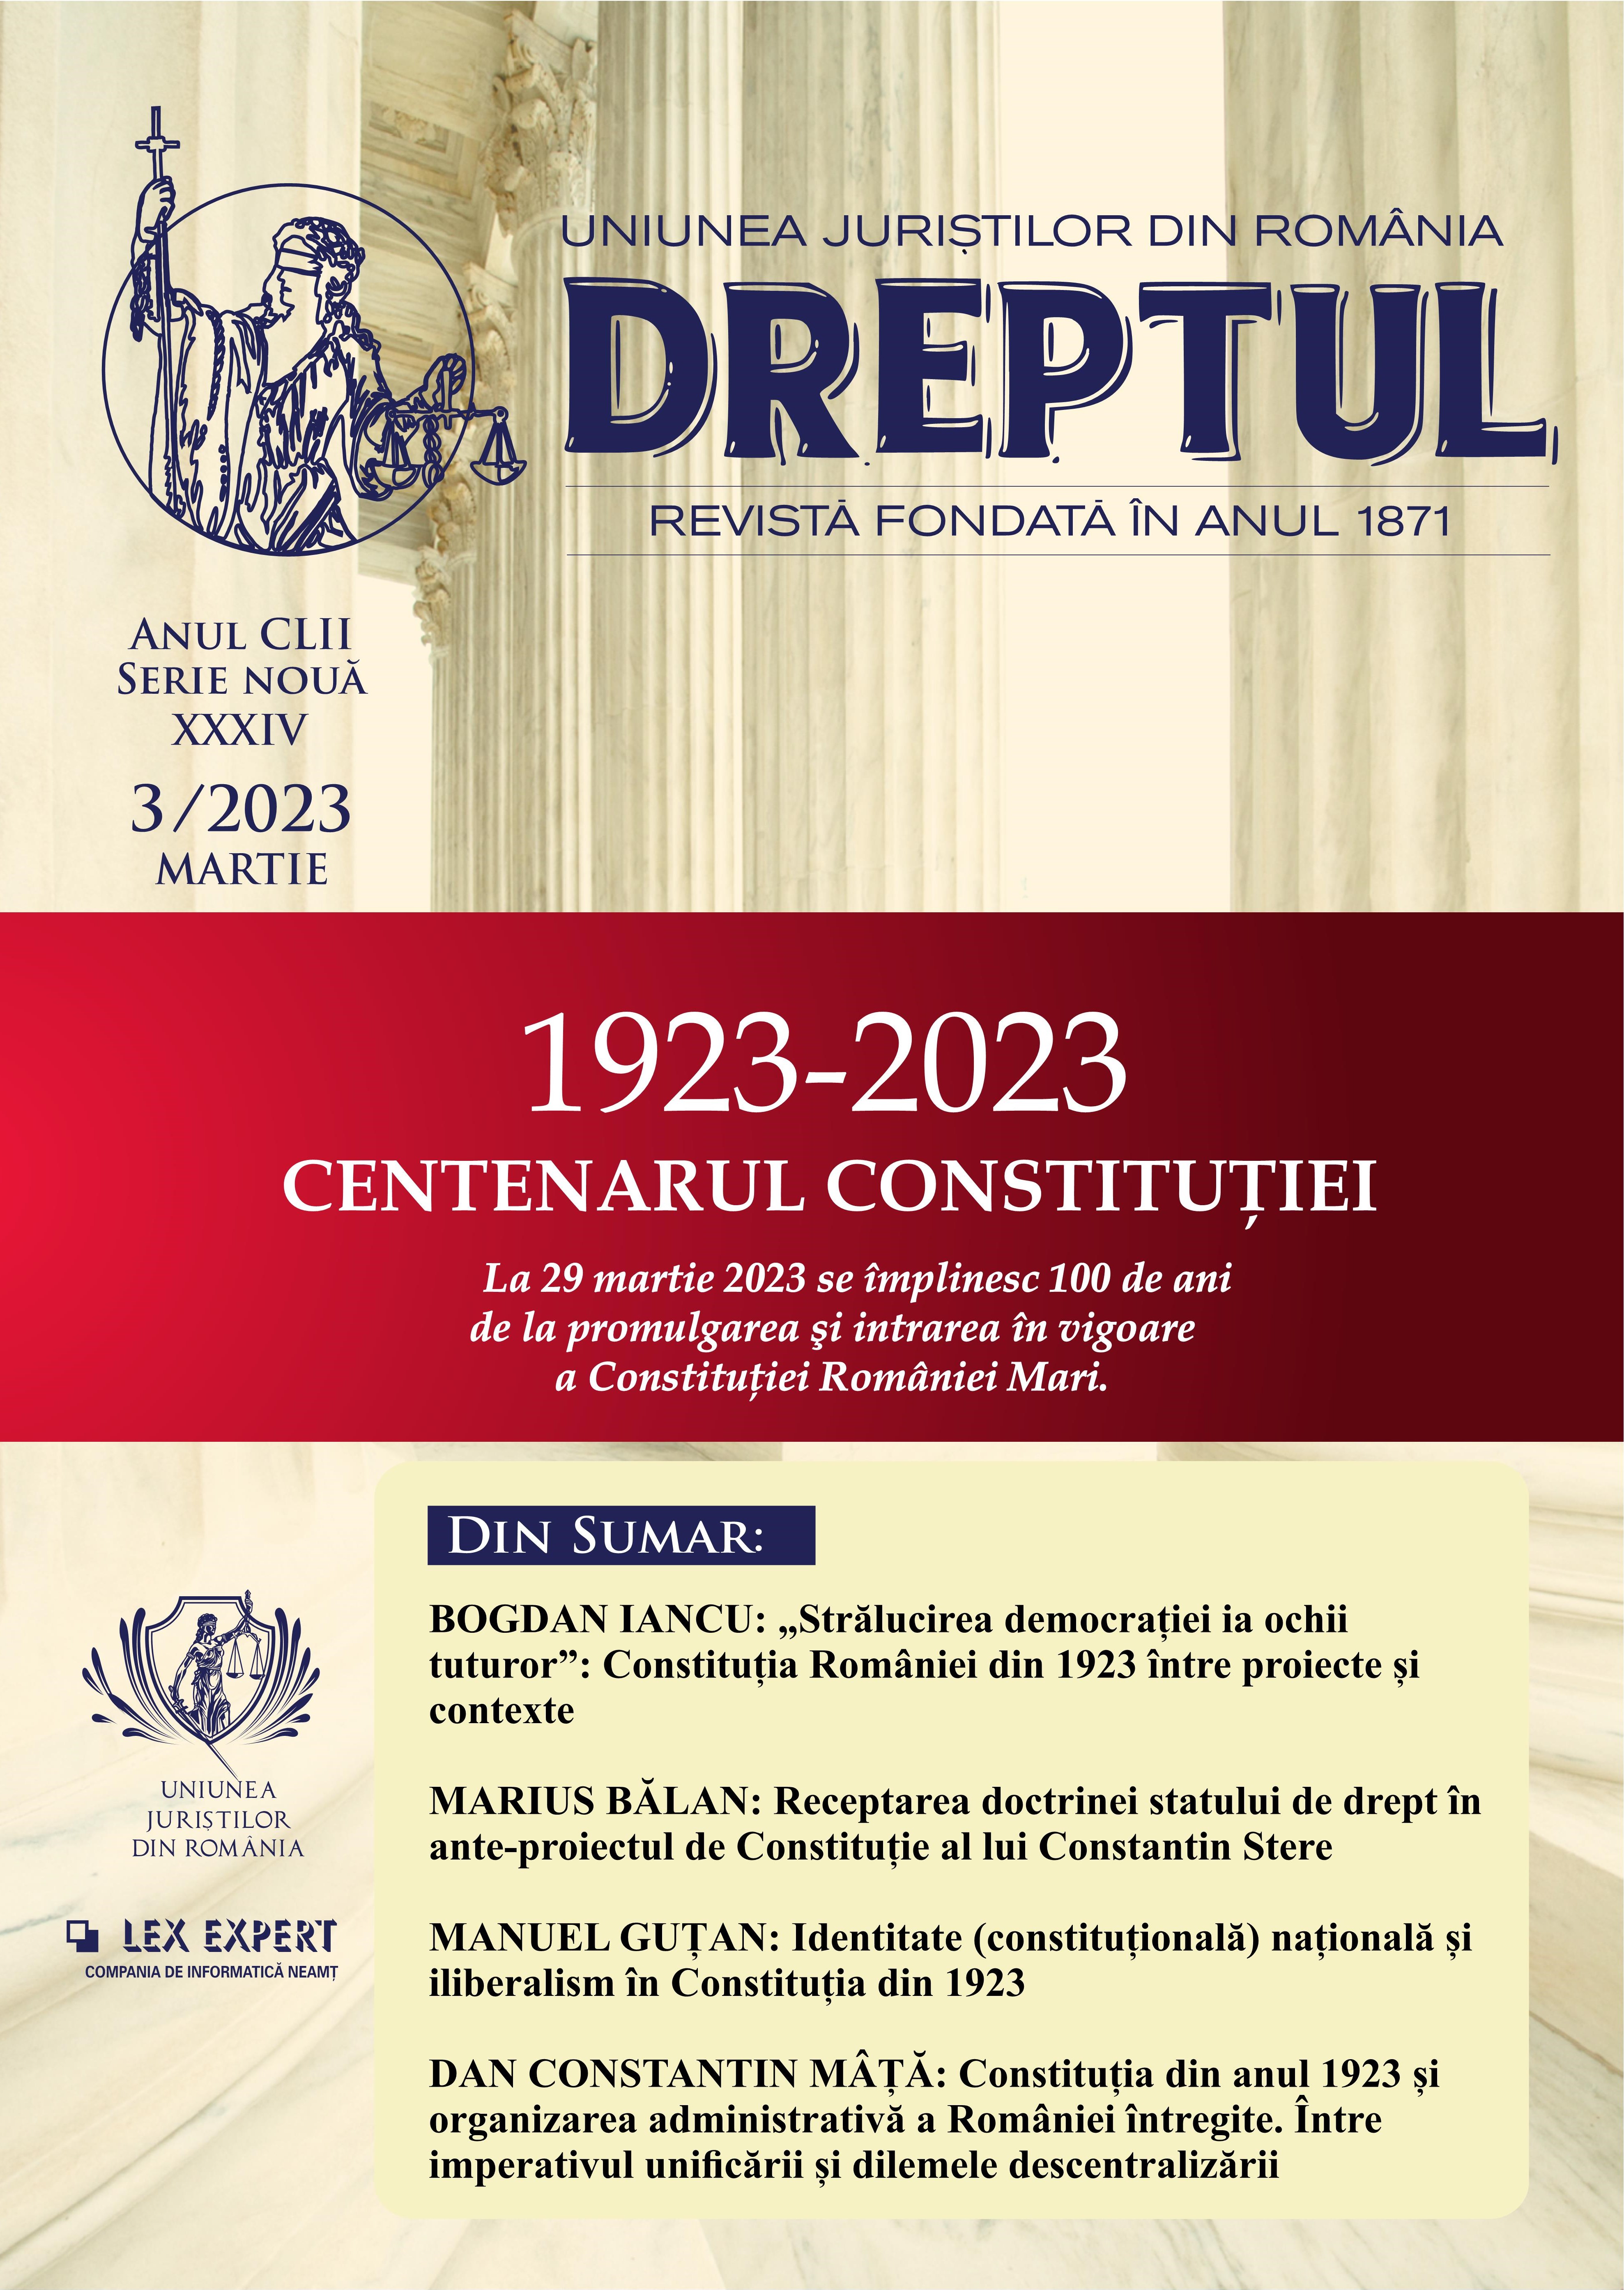 National (constitutional) identity and illiberalism in the Constitution of 1923 Cover Image